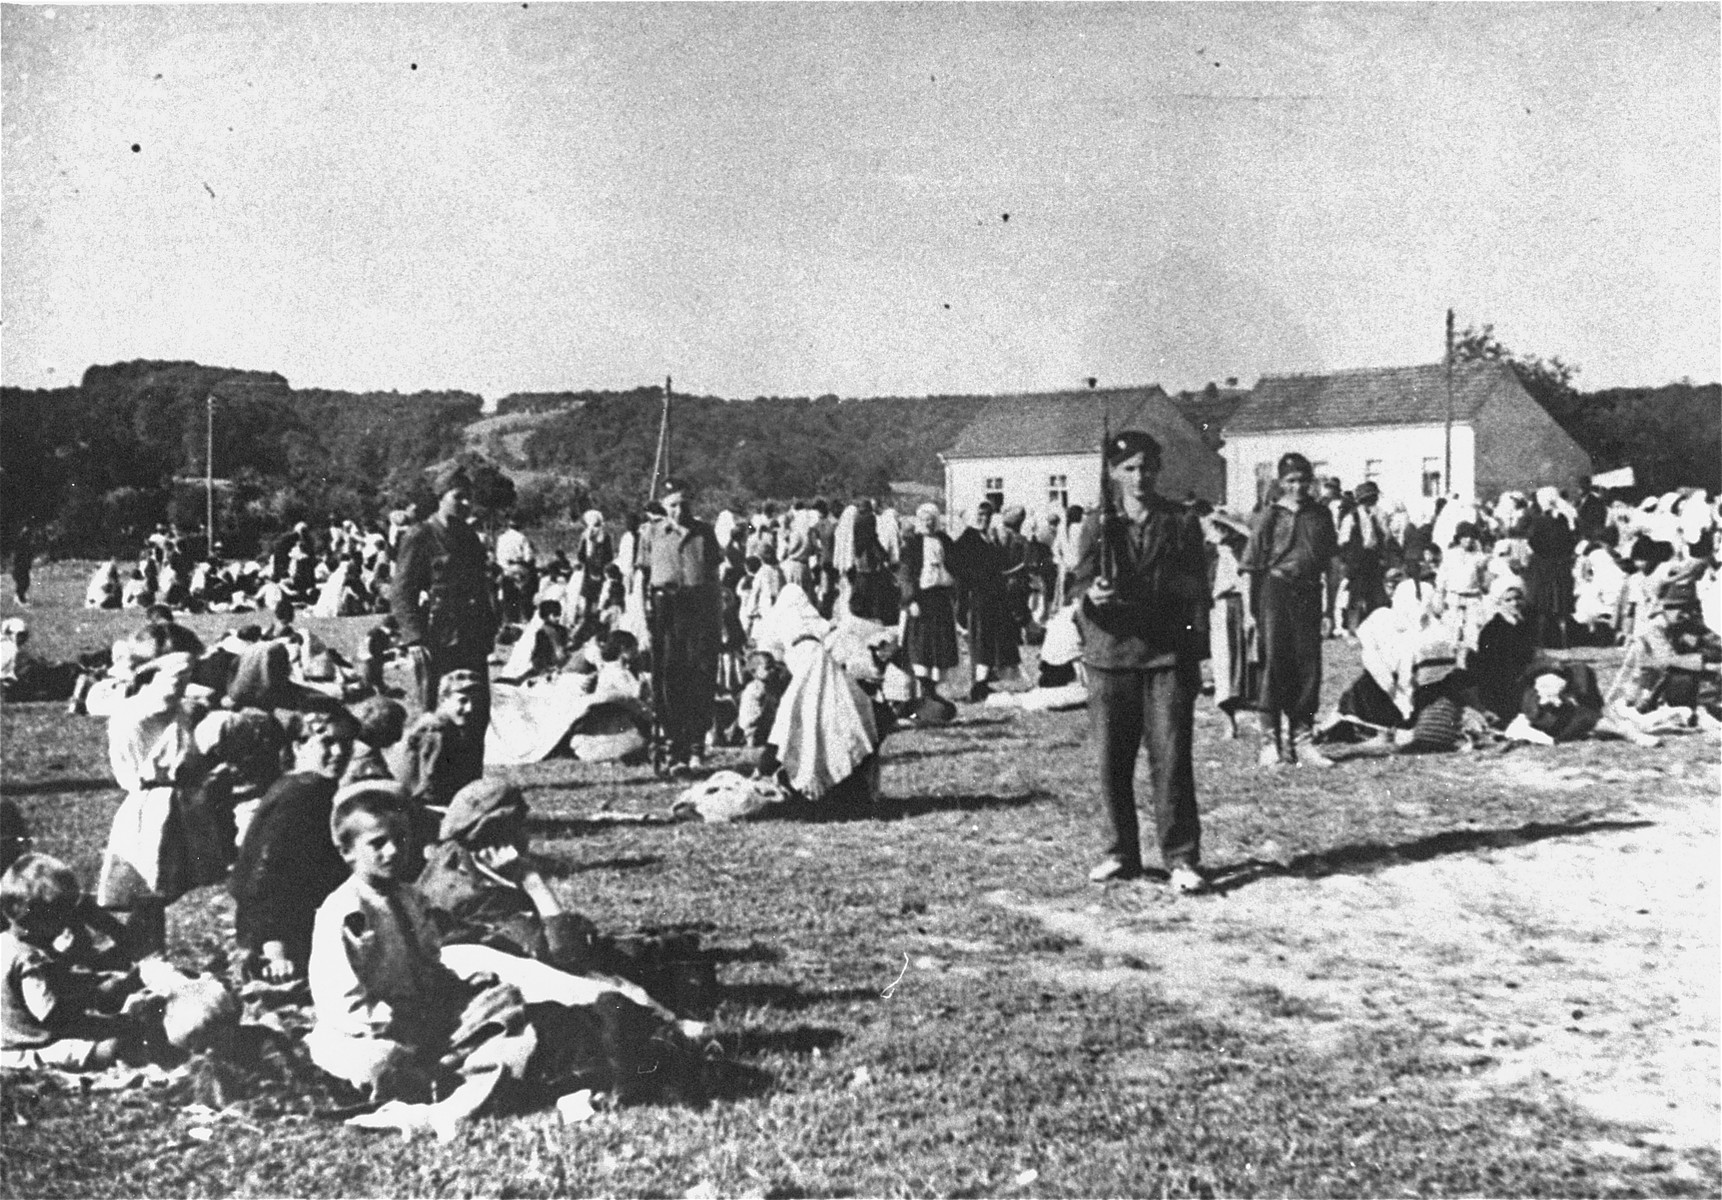 Ustasa militia guard a group of Serbian women and children from the Kozara region, who are imprisoned in the Daruvar concentration camp.